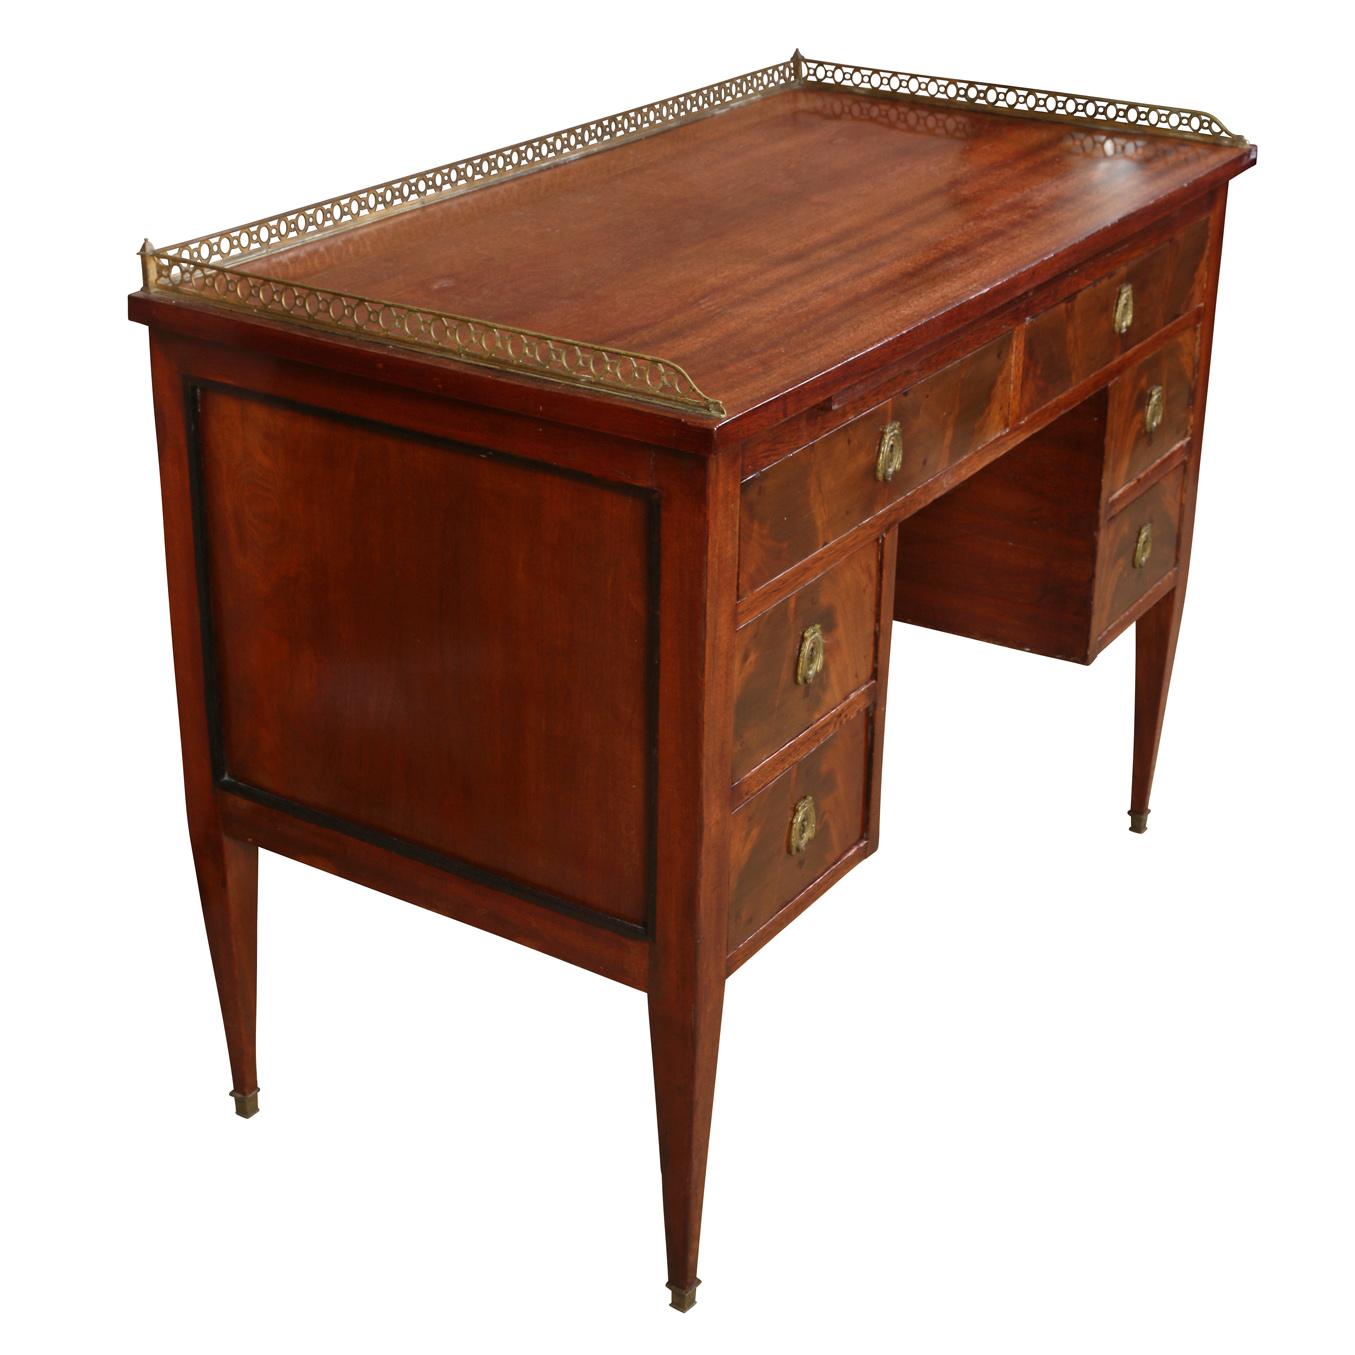 A petite burled wood antique desk with brass gallery rail and brass decorated hardware surrounding each drawer's keyhole. Beautiful burled wood on the face of each of six drawer faces and the desk top has beautiful wood grain running through it and